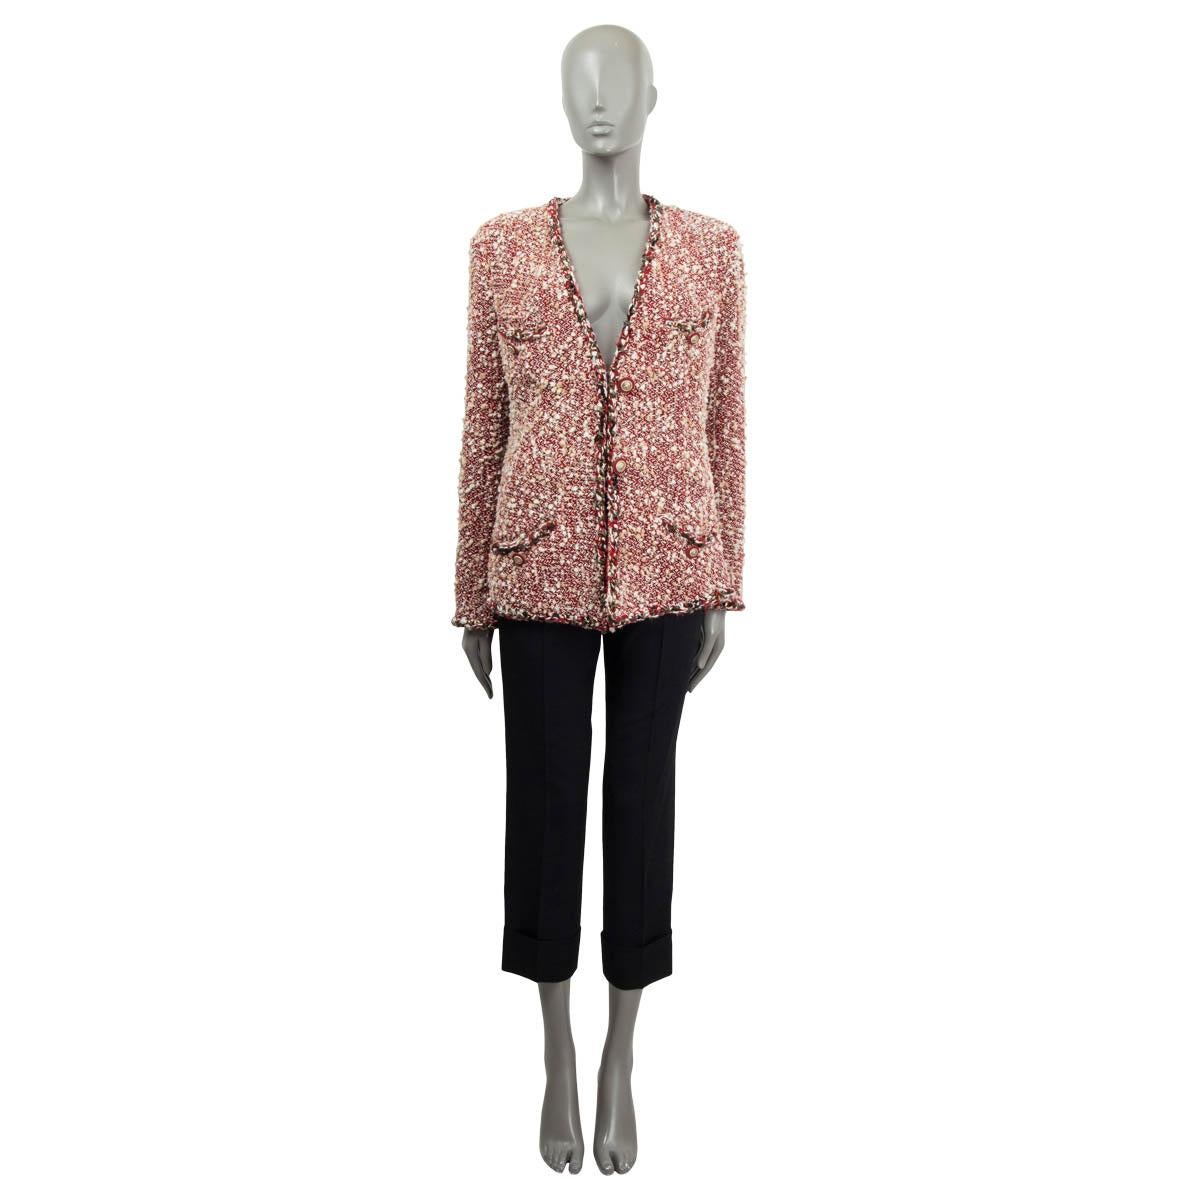 100% authentic Chanel collarless tweed jacket in red and white wool (71%), nylon (25%), acrylic (2%) and cotton (2%). Features a V-neck, braided trim with star studs and four pockets on the front. Closes with two start buttons. Lined in red silk